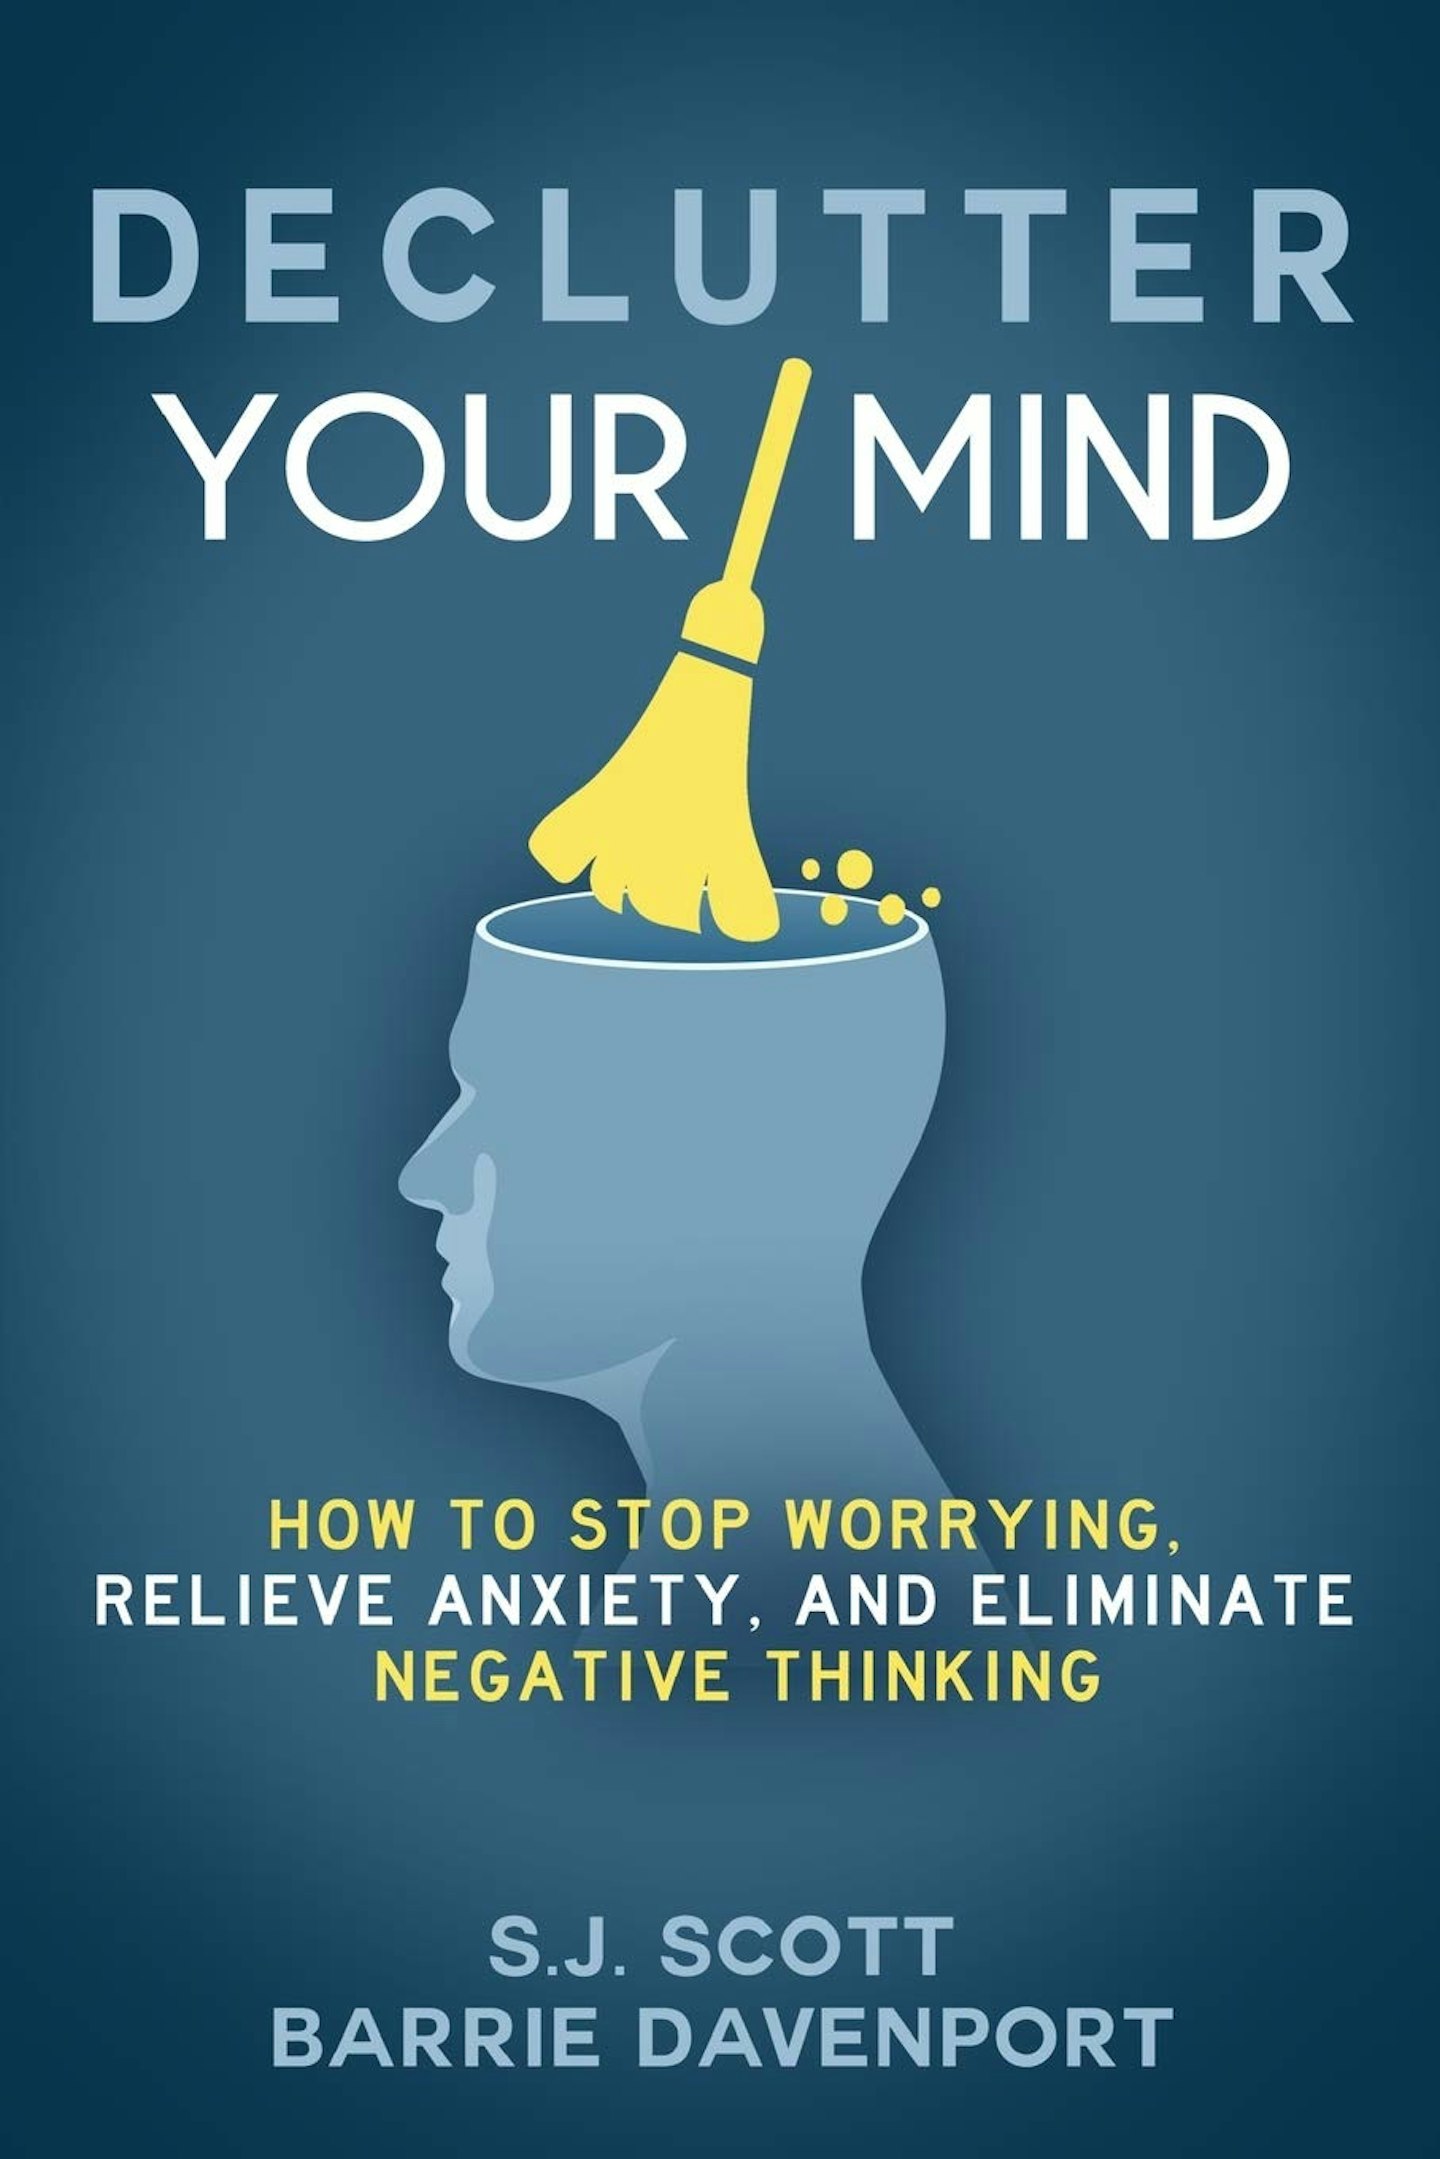 Declutter Your Mind: How to Stop Worrying,Relieve Anxiety and Eliminate Negative Thinking by S.J.Scott and Barrie Davenport